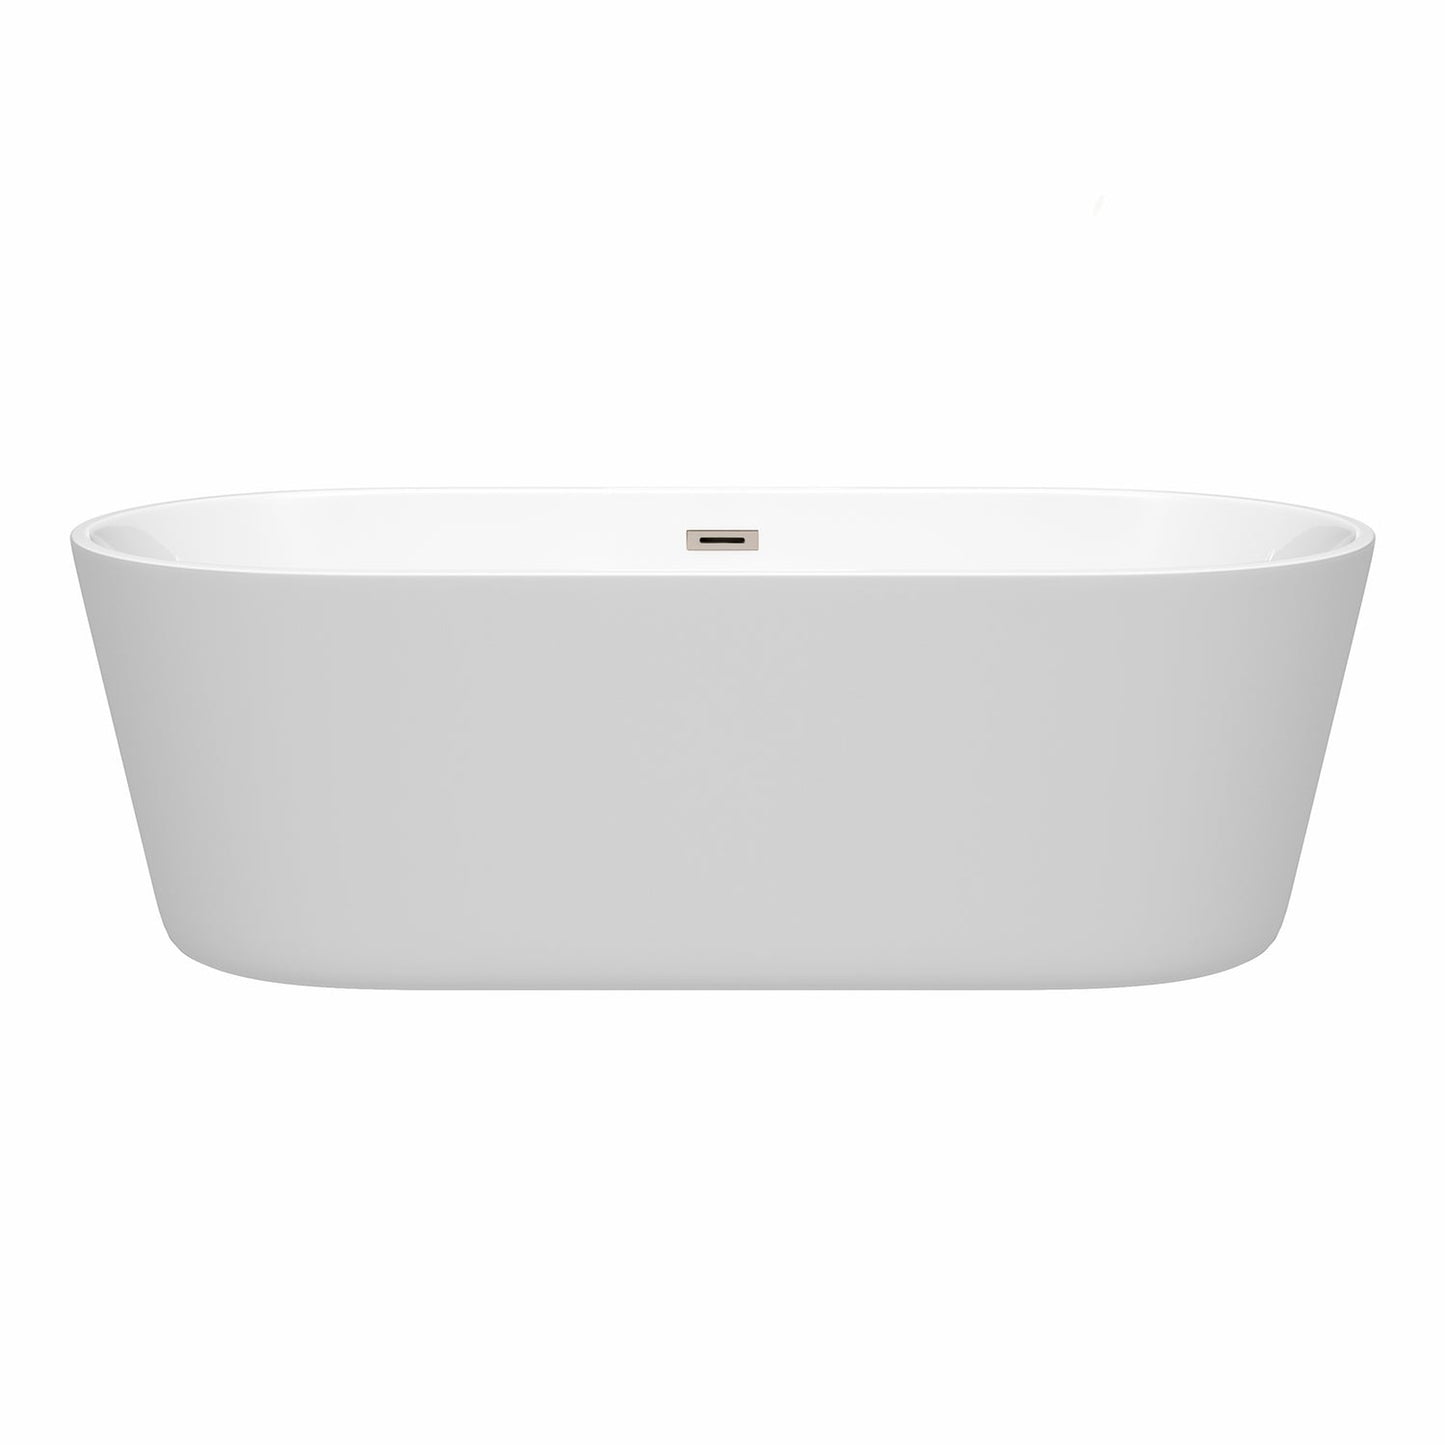 Wyndham Collection Carissa 71" Freestanding Bathtub in White With Brushed Nickel Drain and Overflow Trim